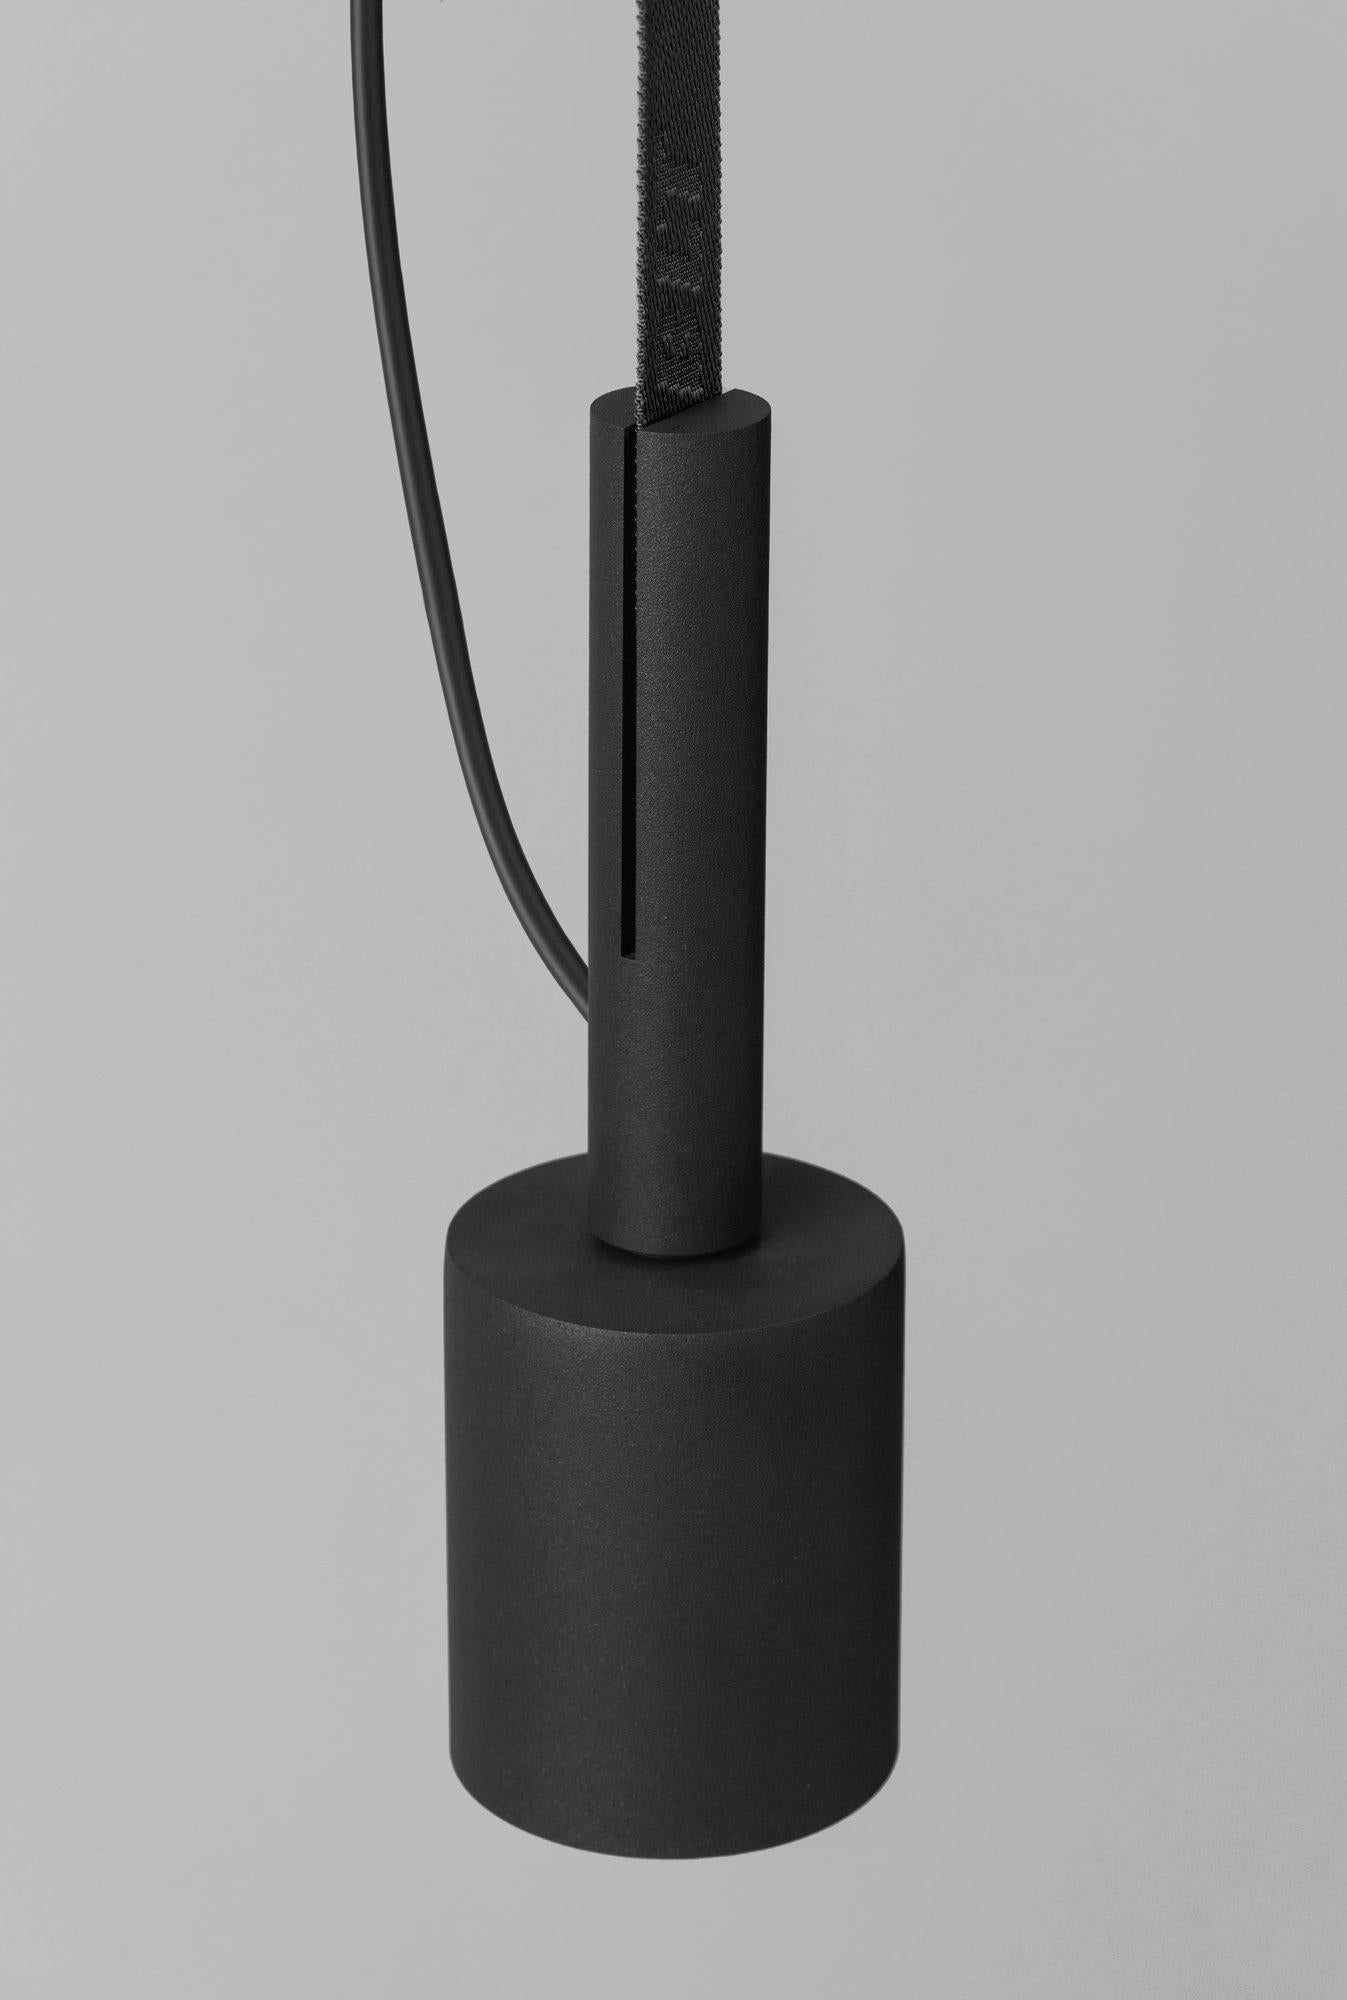 BLT_5 Black Pendant Lamp by +kouple
Dimensions: Ø 8 x H 25,2 cm. 
Materials: Powder-coated steel and textile.

Available in different color options. The rod length is 250 cm. Please contact us.

All our lamps can be wired according to each country.